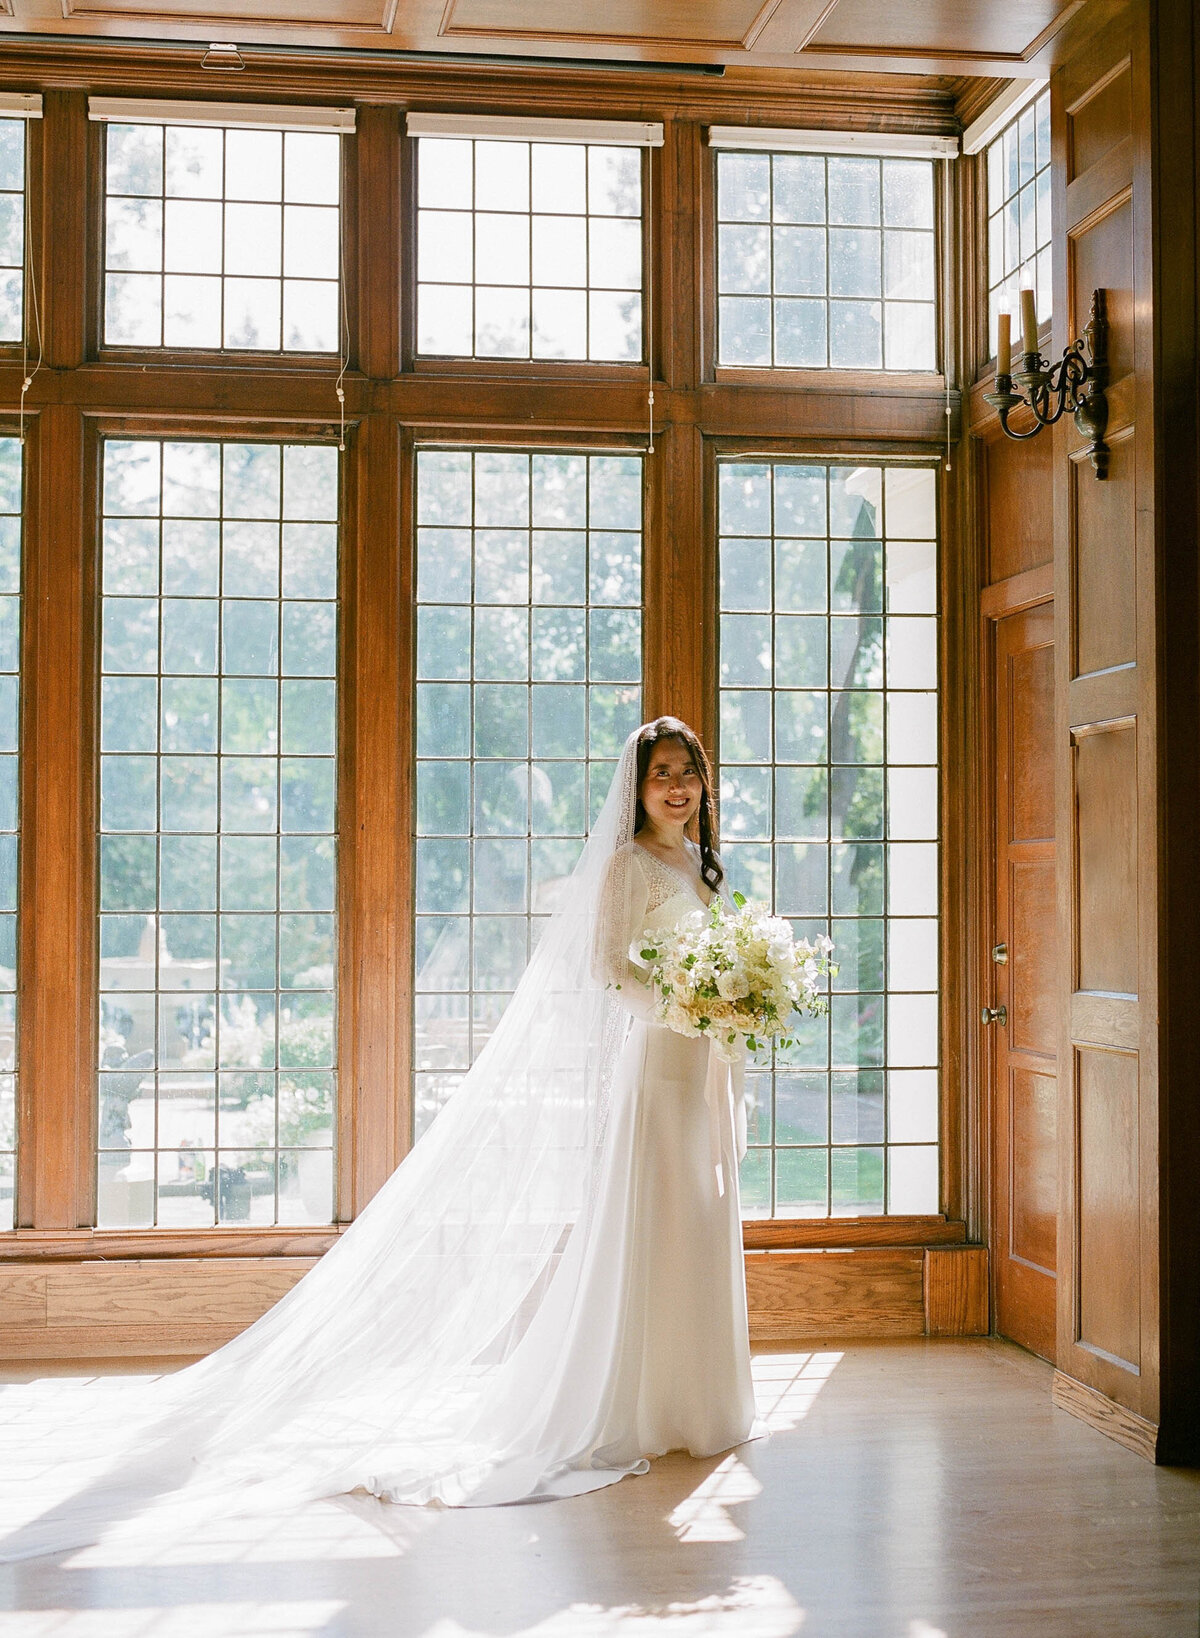 1 - Qi & Fengtao - Lairmont Manor - Kerry Jeanne Photography (77)